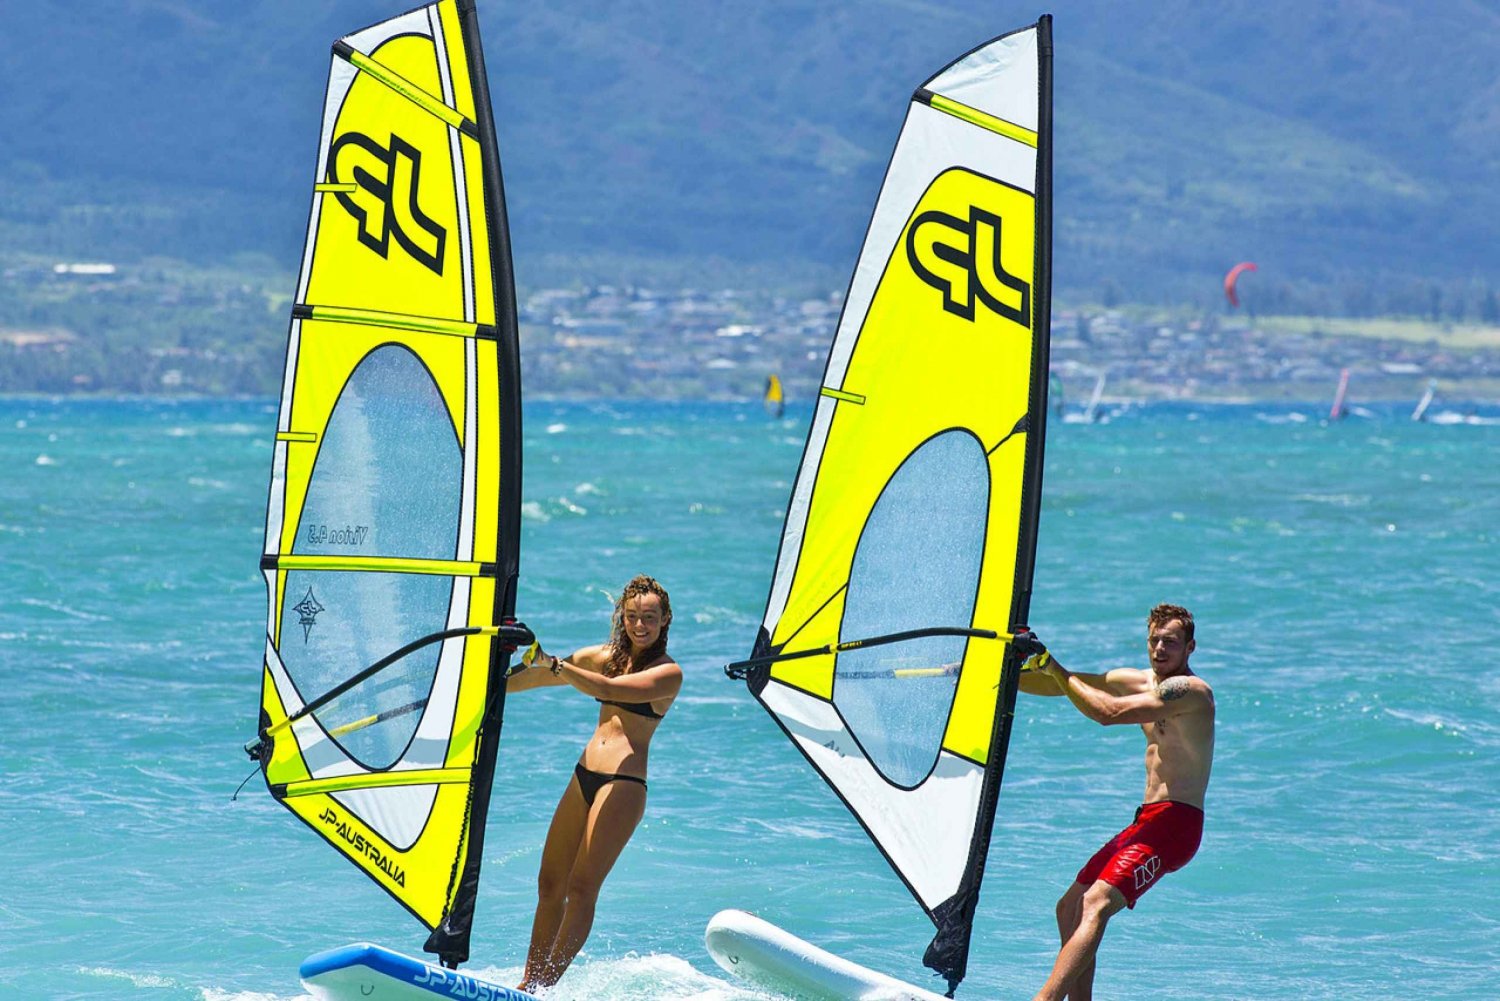 Miami: Windsurfing for Beginners and Experts